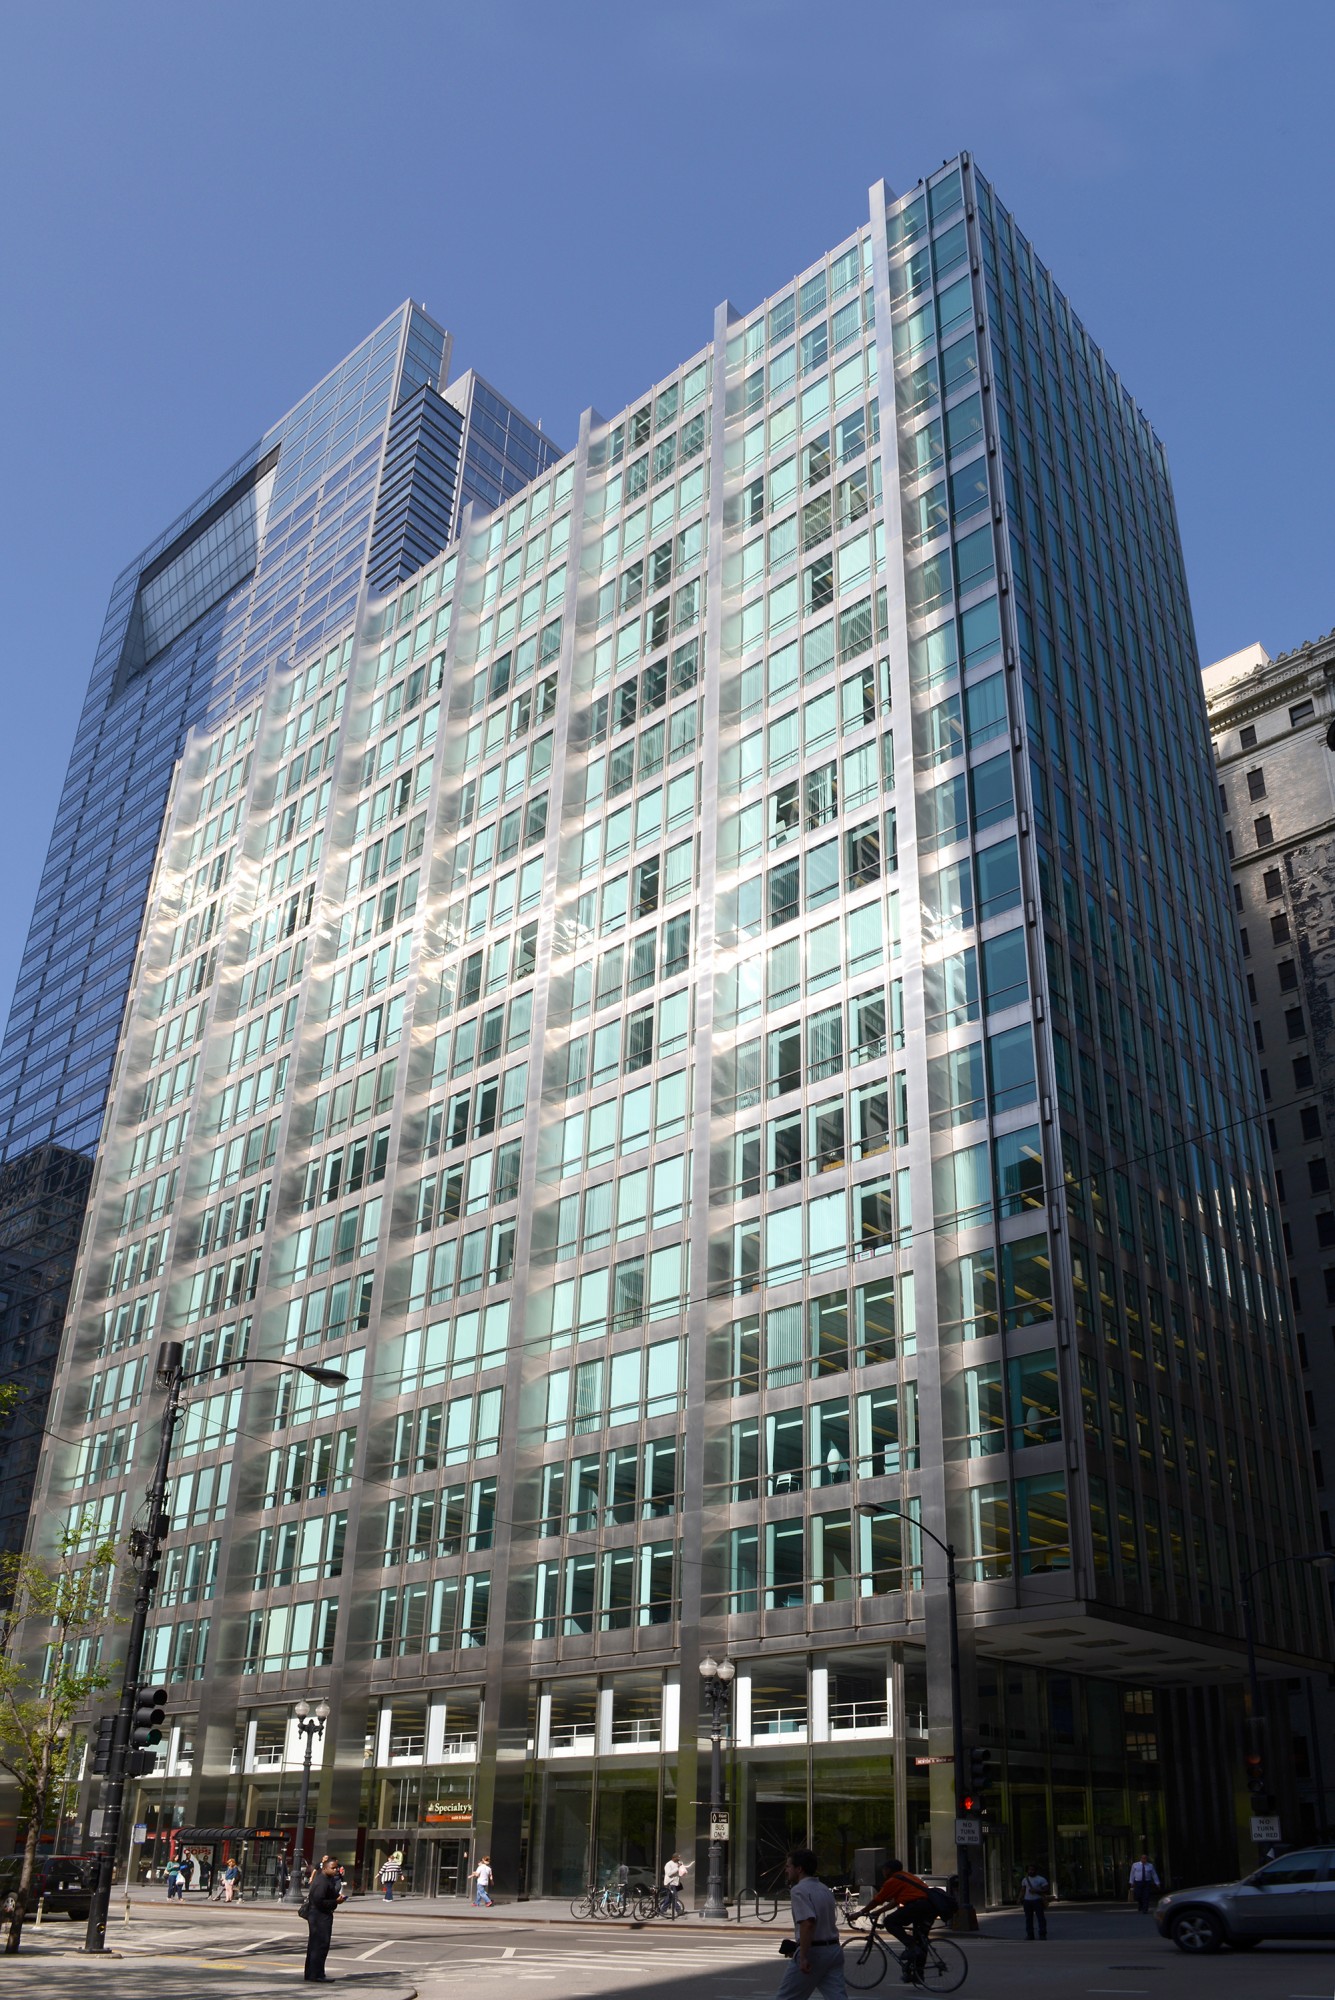 Inland Steel · Buildings of Chicago · Chicago Architecture ...